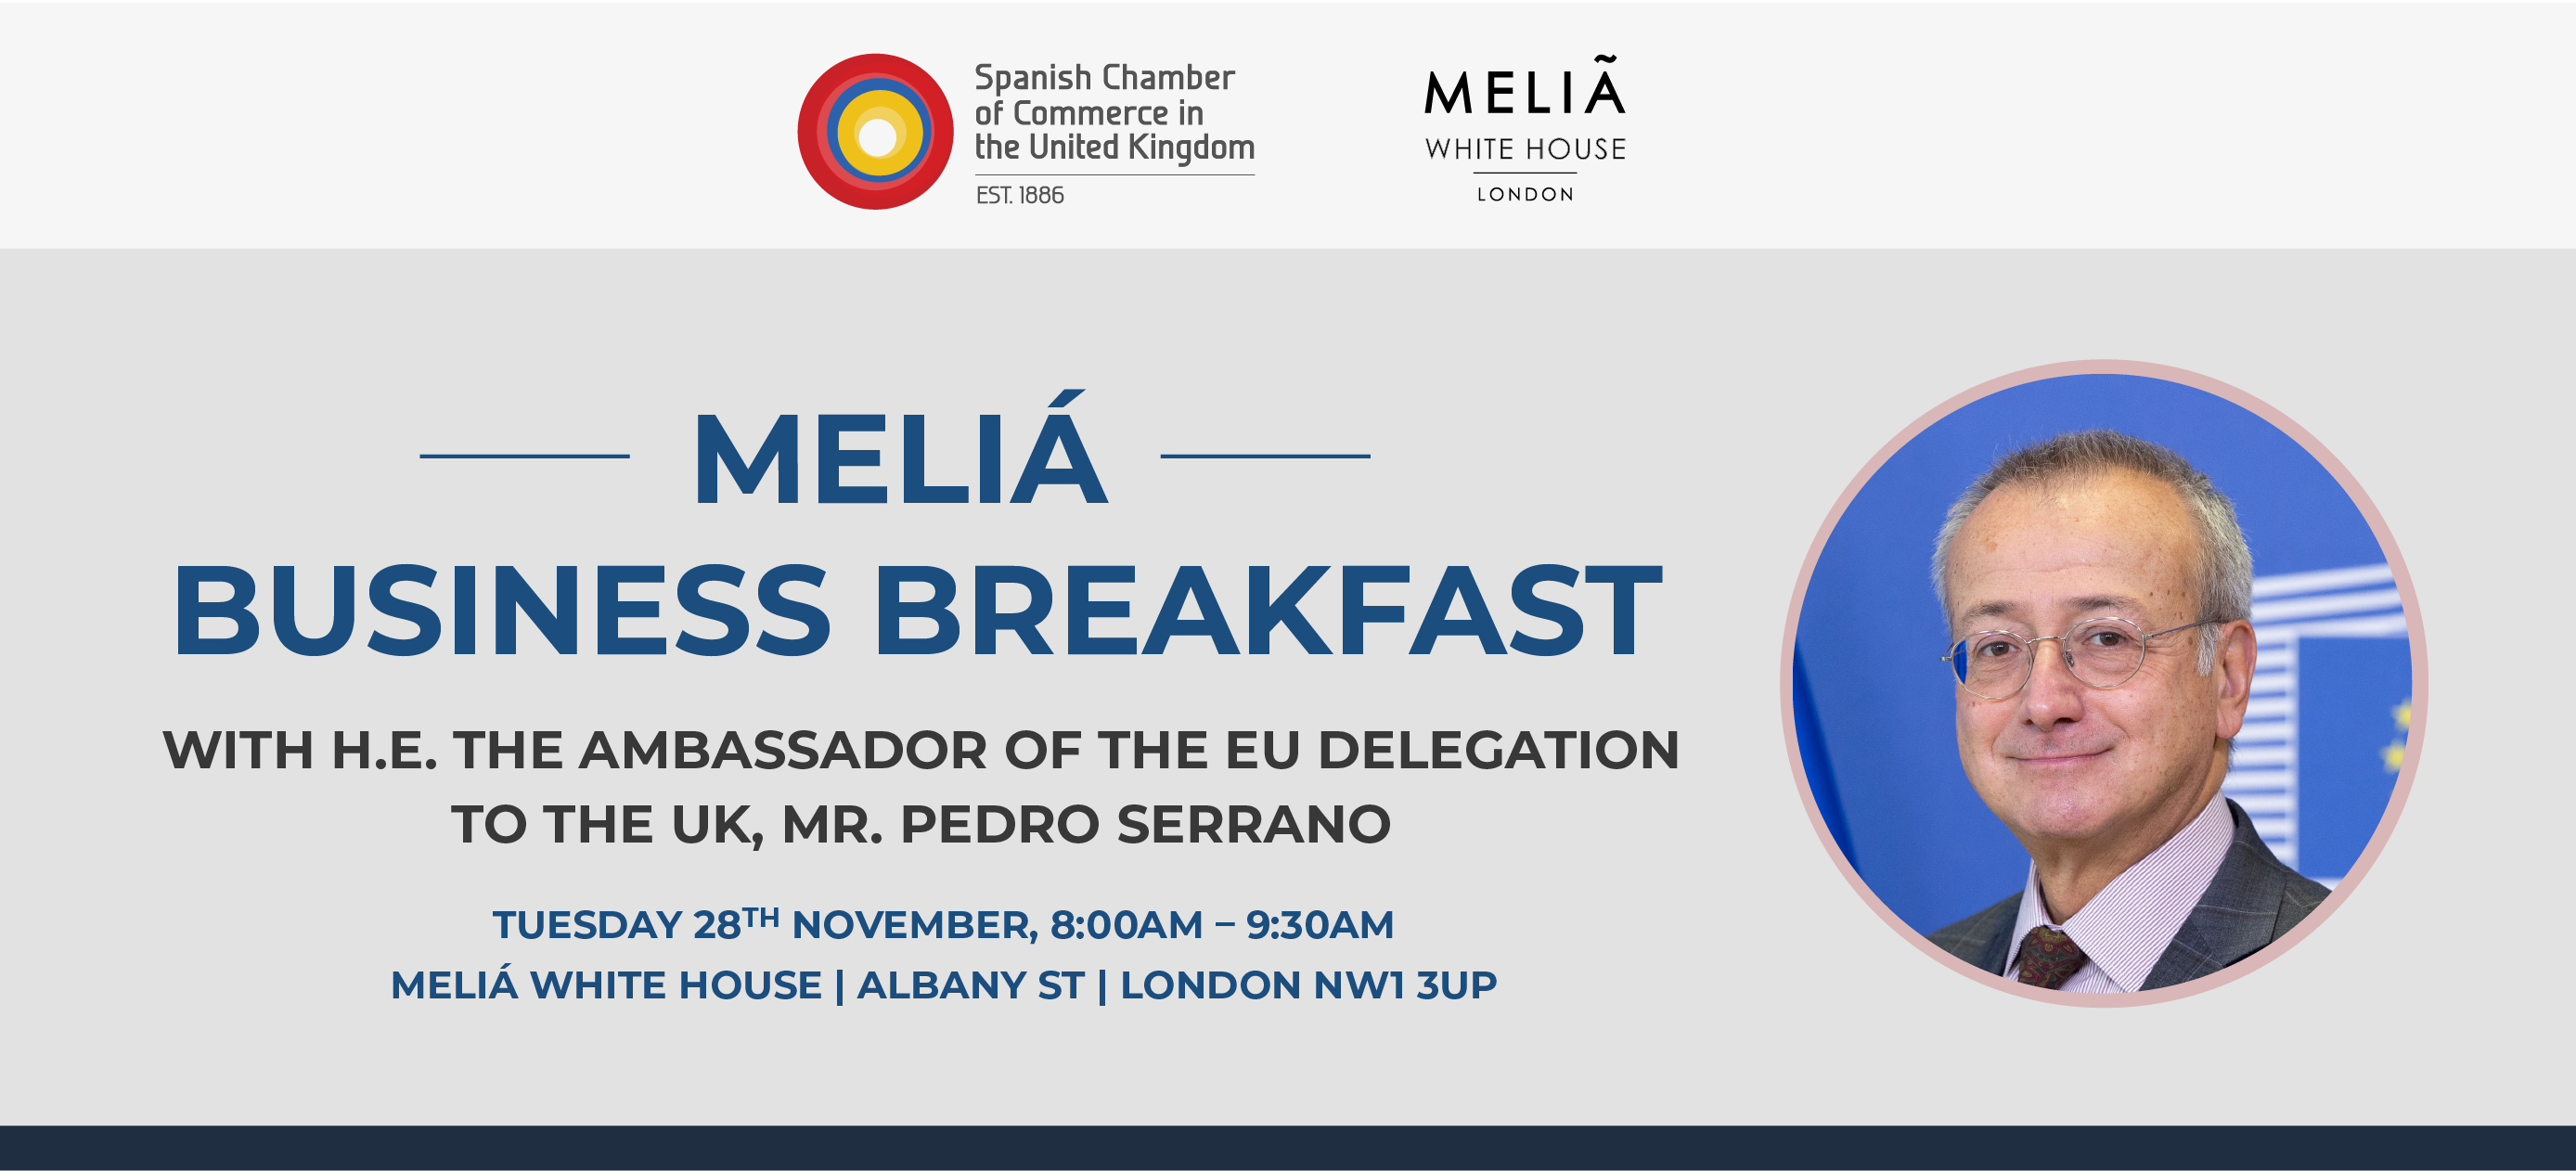 MELIÁ BUSINESS BREAKFAST WITH H.E. THE AMBASSADOR OF THE EU DELEGATION TO THE UK, MR. PEDRO SERRANO